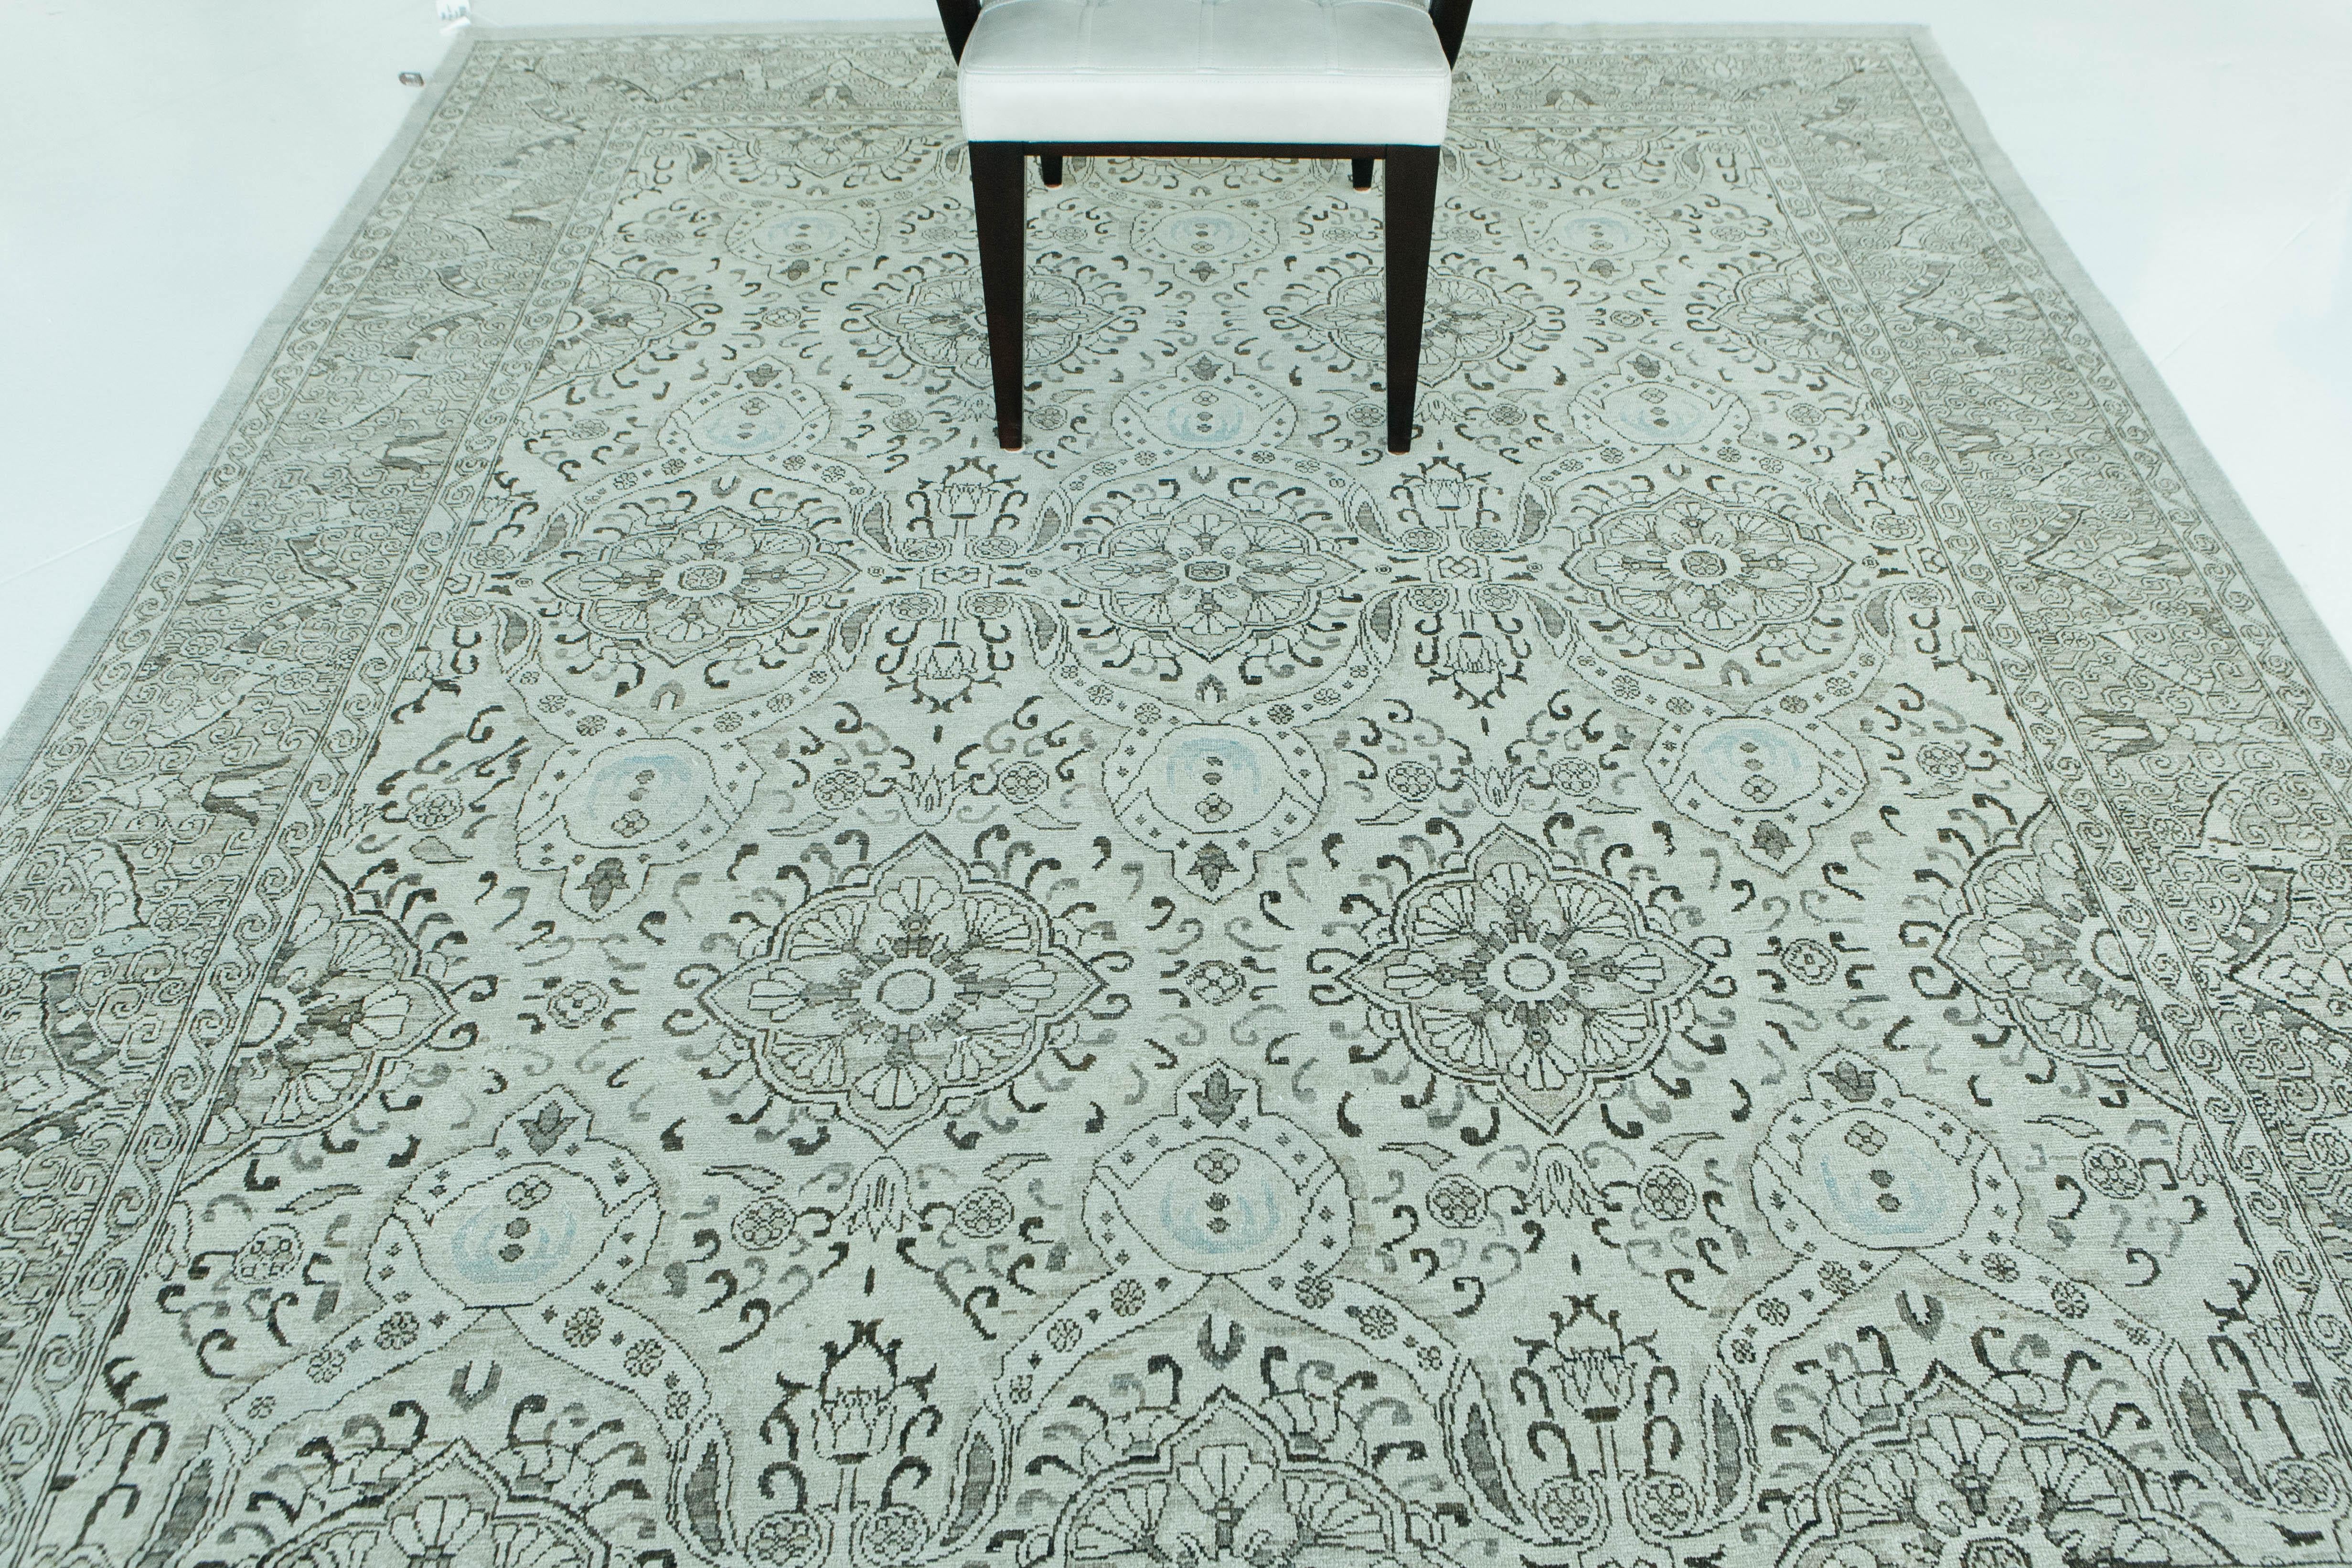 A gorgeous Agra style recreation with beautiful vintage tones in peach, taupe, and light blue. This rug's intricate Agra style motifs and spiraling vines in addition to its complementary colors give this Agra rug a light, ethereal appearance. This